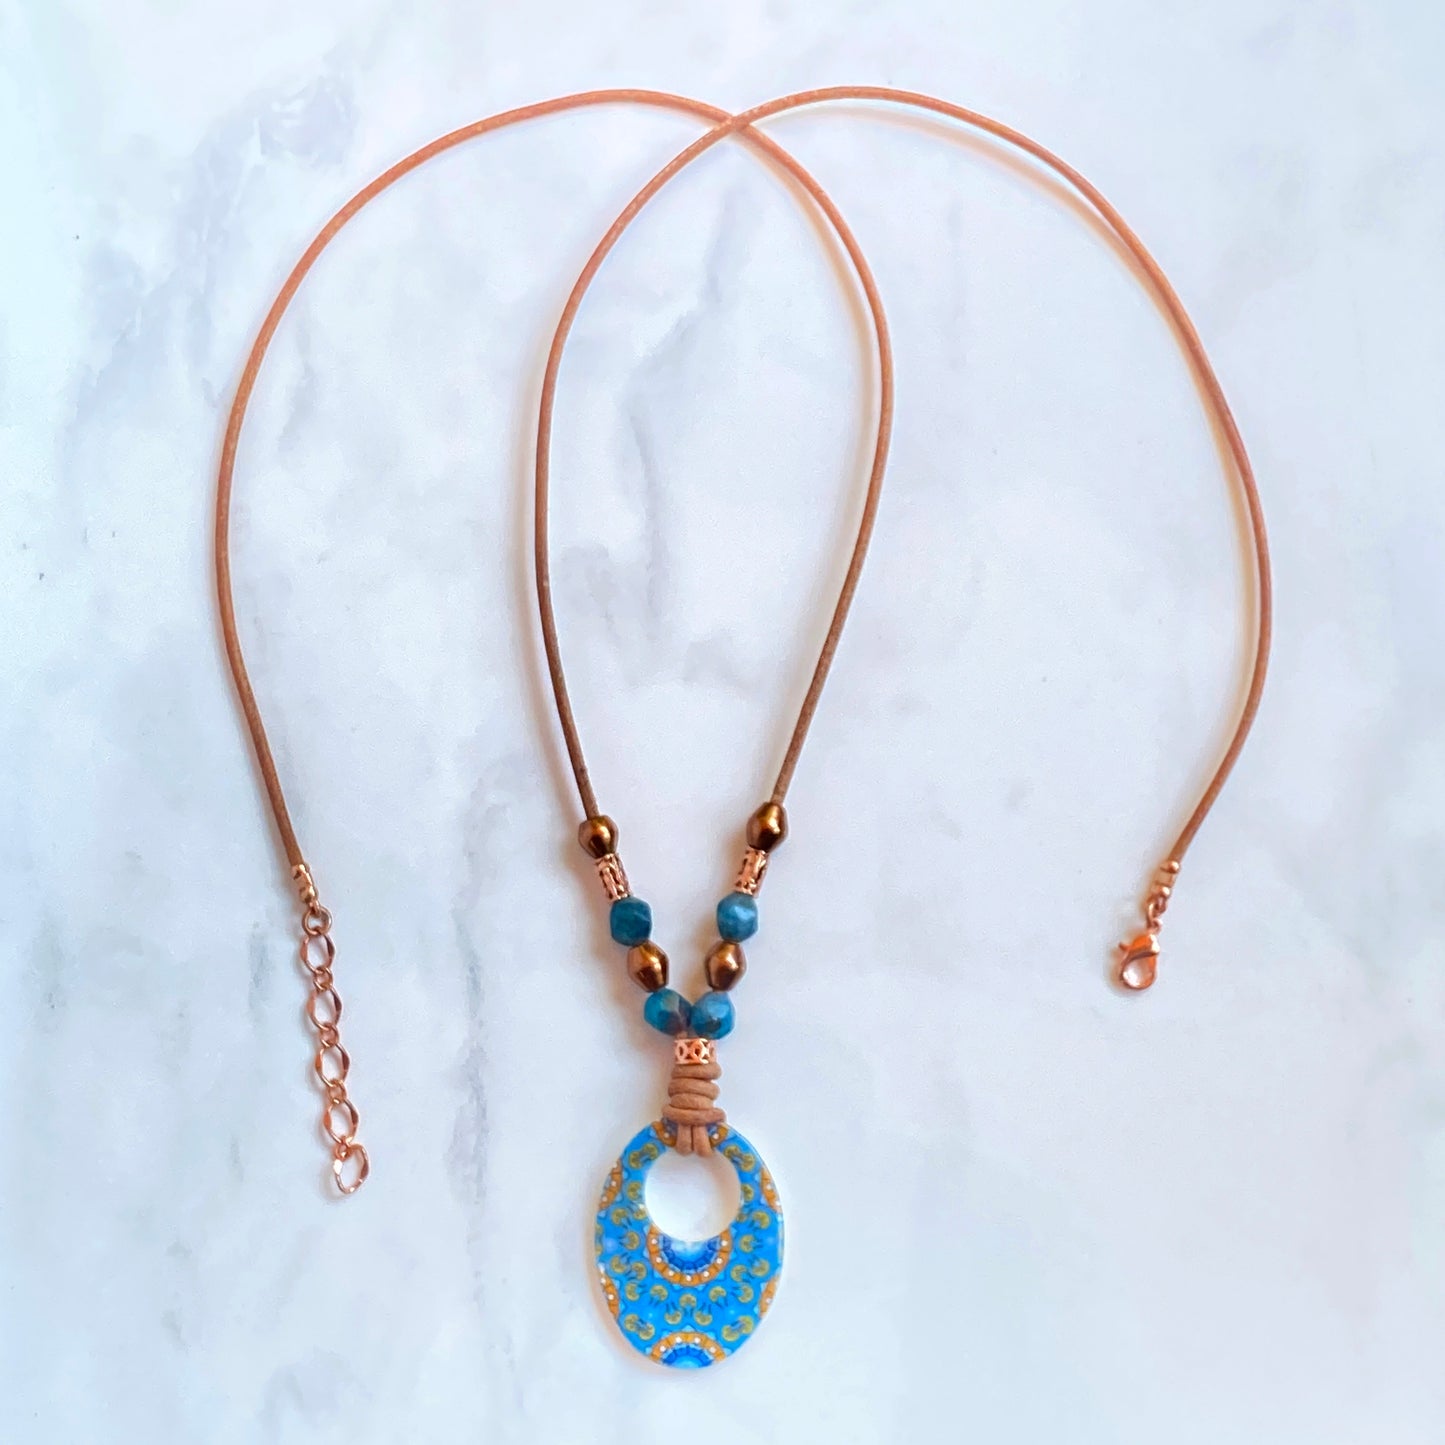 Mother of Pearl, Apatite gemstone, and Copper on Leather Necklace